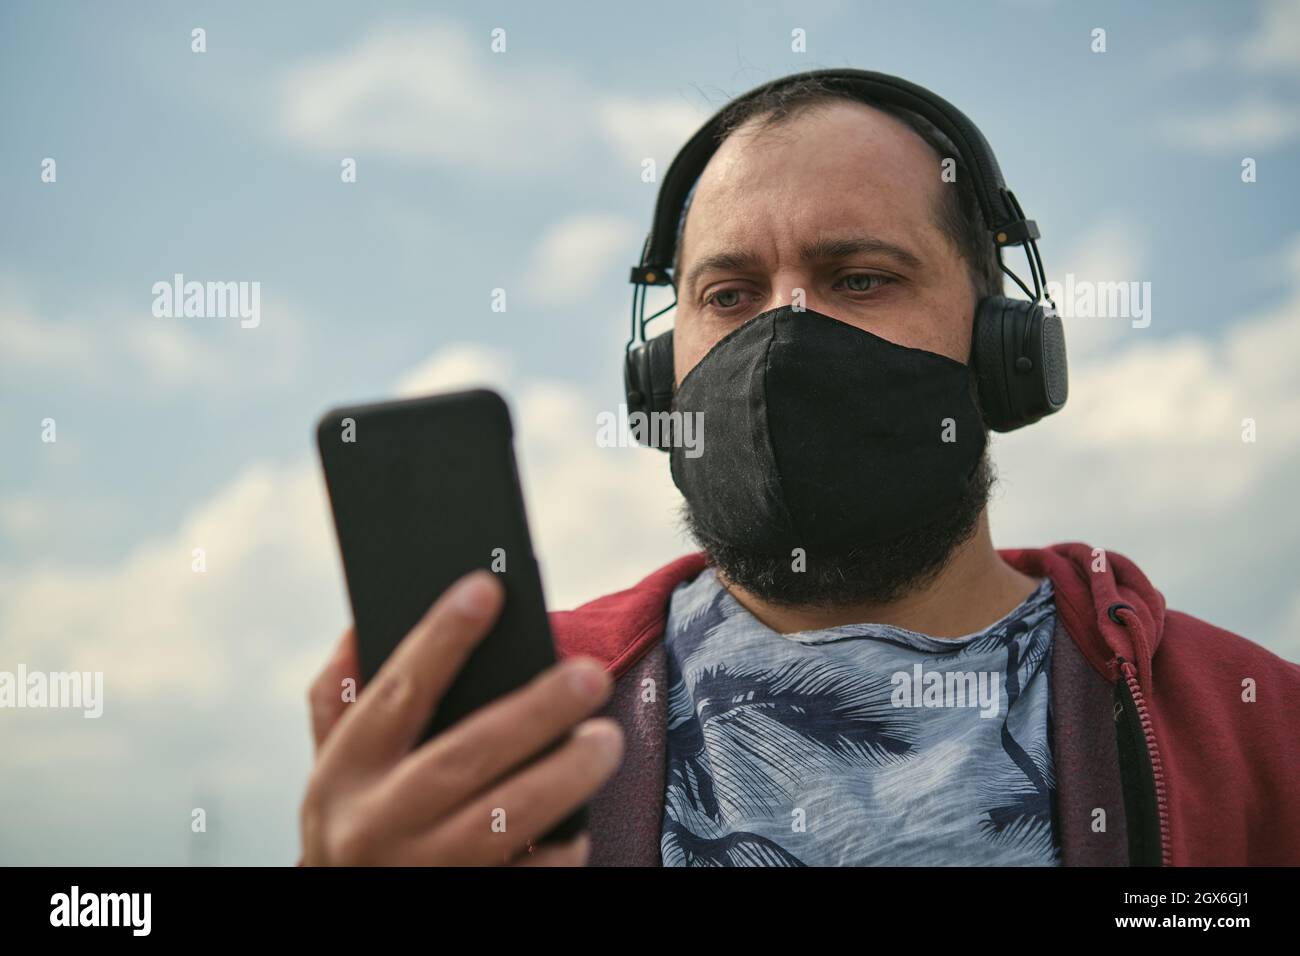 Middle-aged European man in headphones outdoors listening to music against the background of the sky, mobile phone in his hand Stock Photo